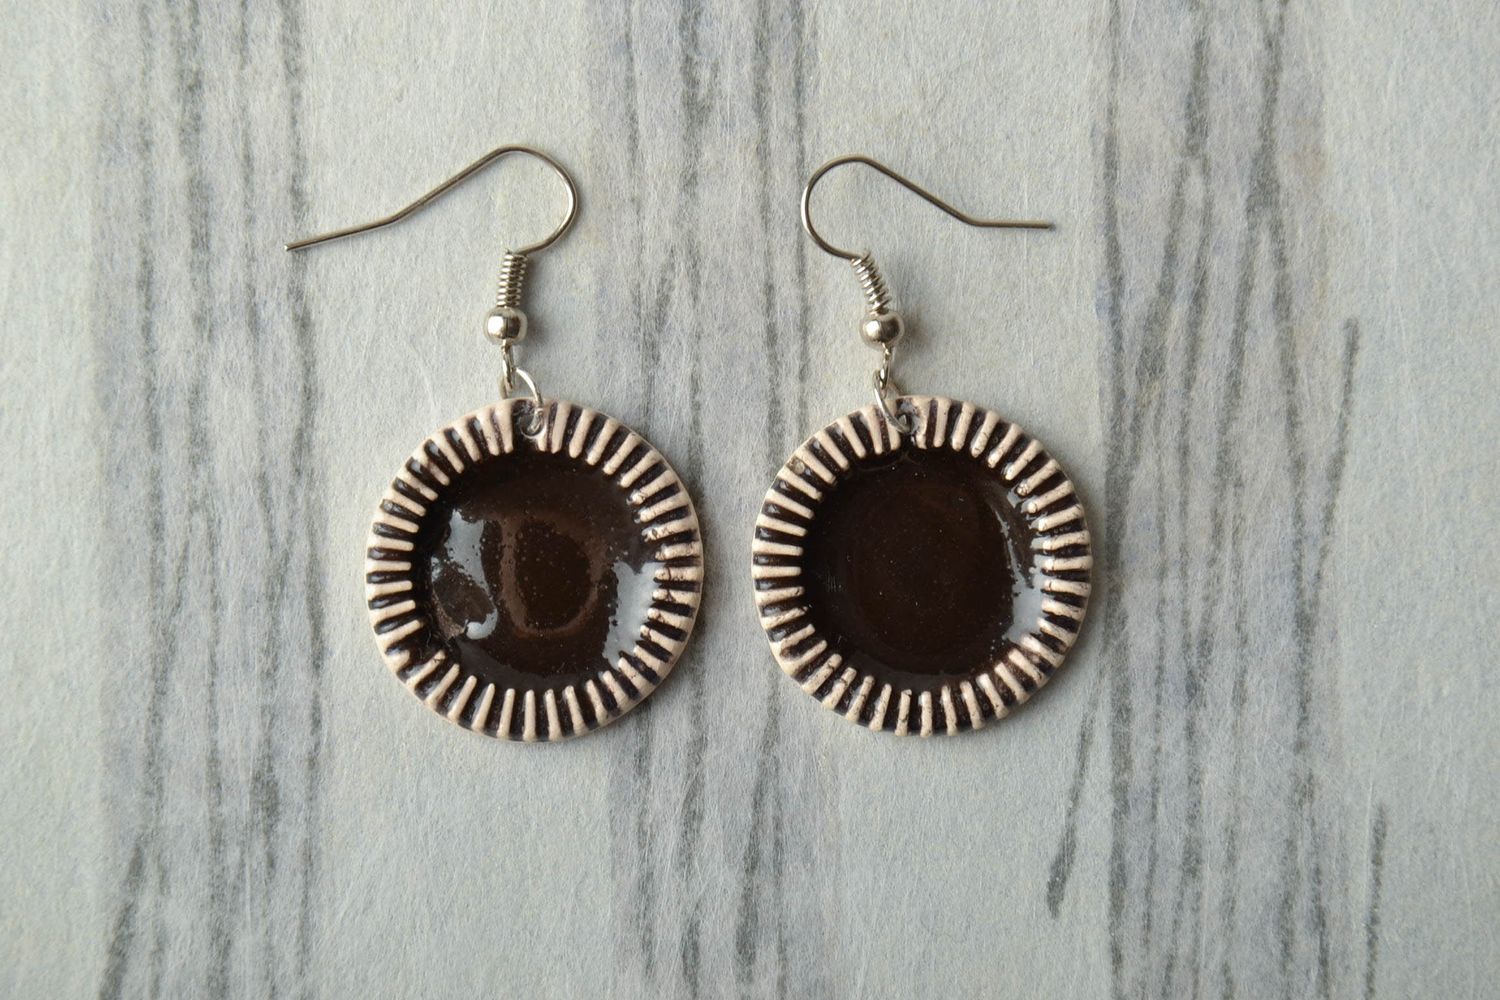 Ceramic earrings in ethnic style painted with enamels Chocolate Sun photo 1